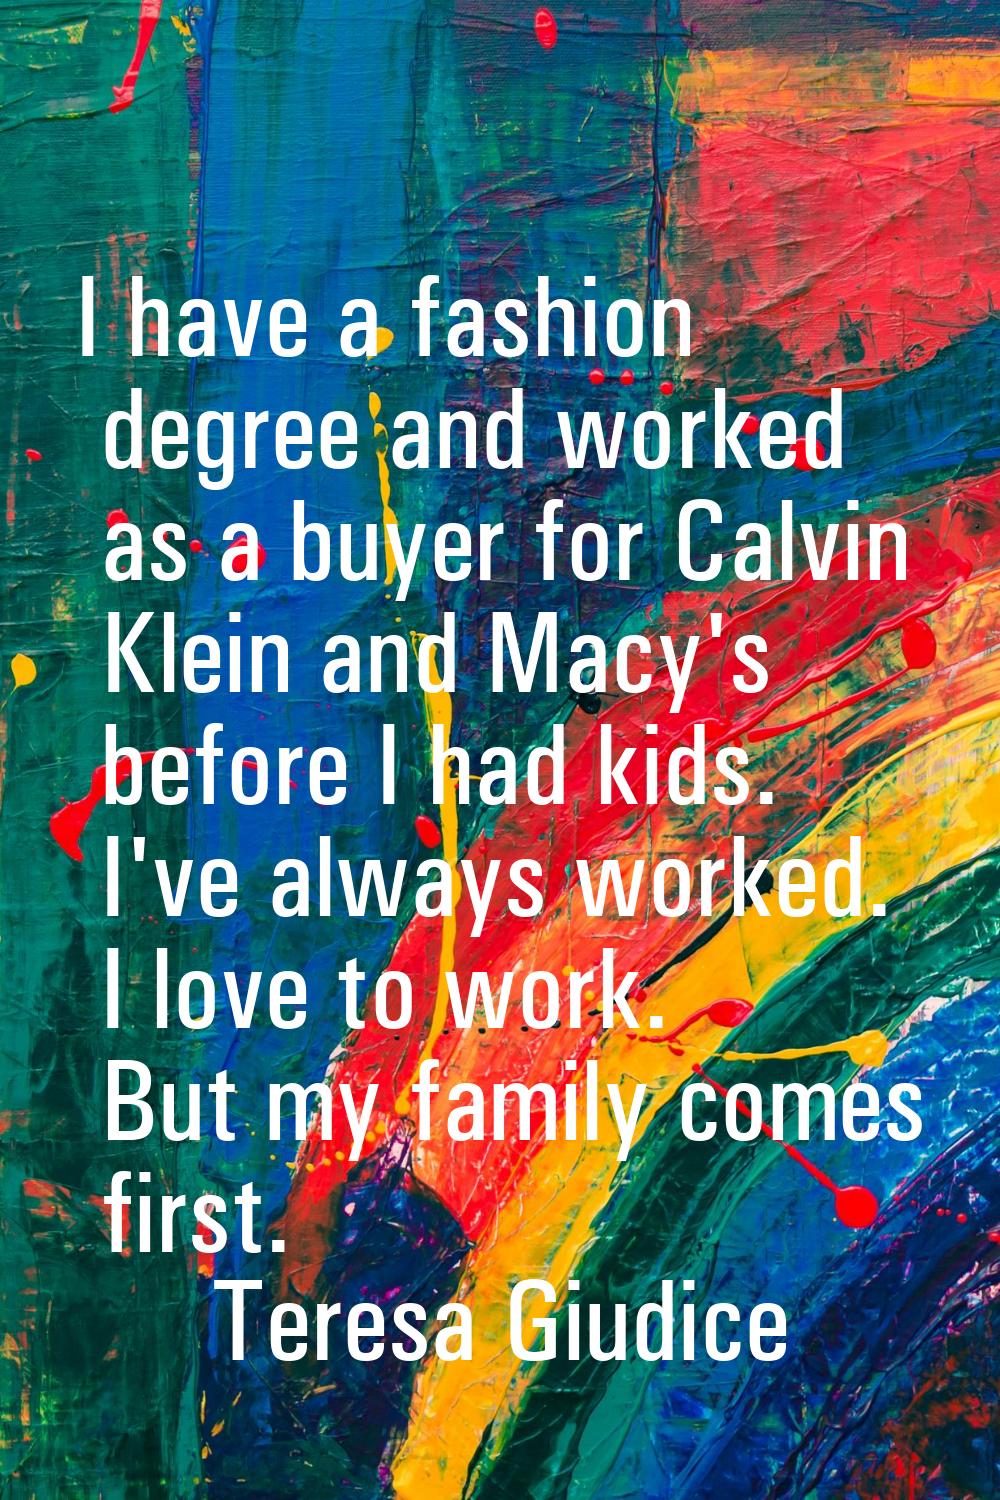 I have a fashion degree and worked as a buyer for Calvin Klein and Macy's before I had kids. I've a